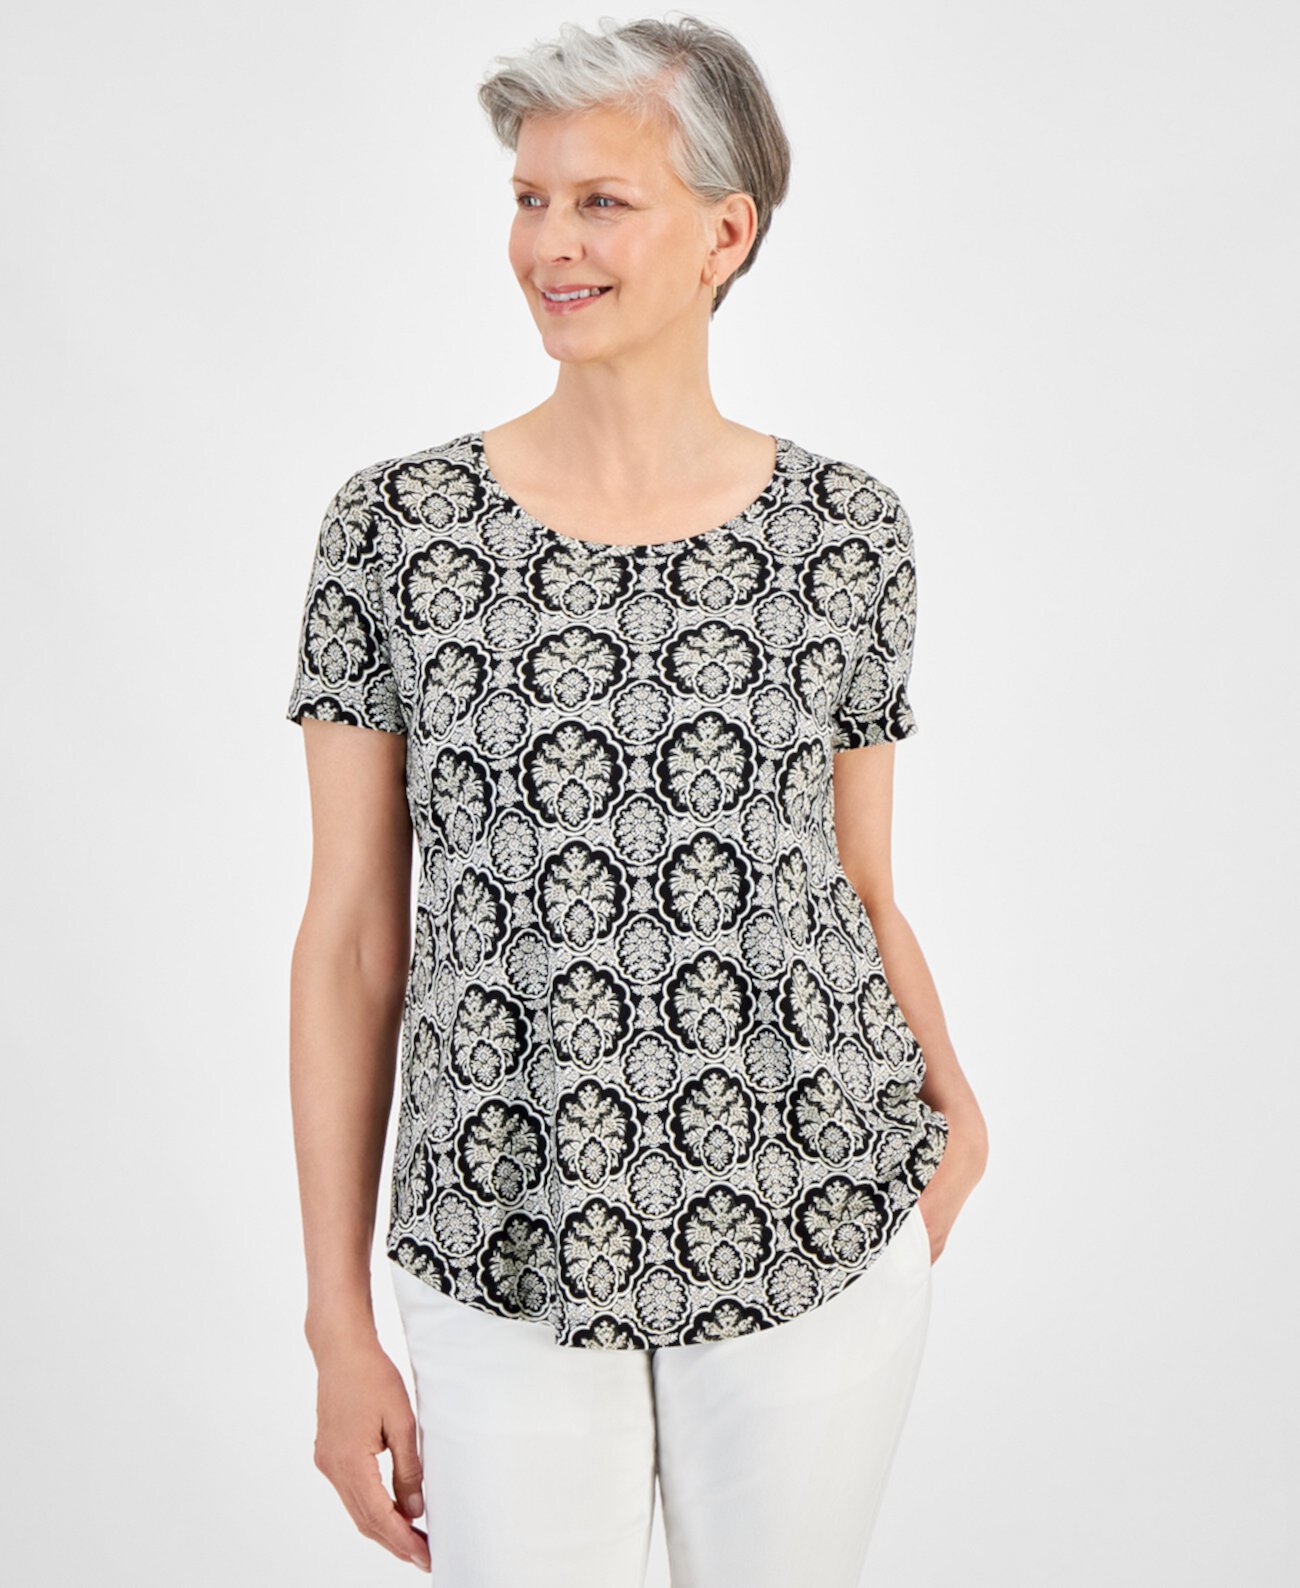 Women's Printed Scoop-Neck Short-Sleeve Top, Created for Macy's J&M Collection